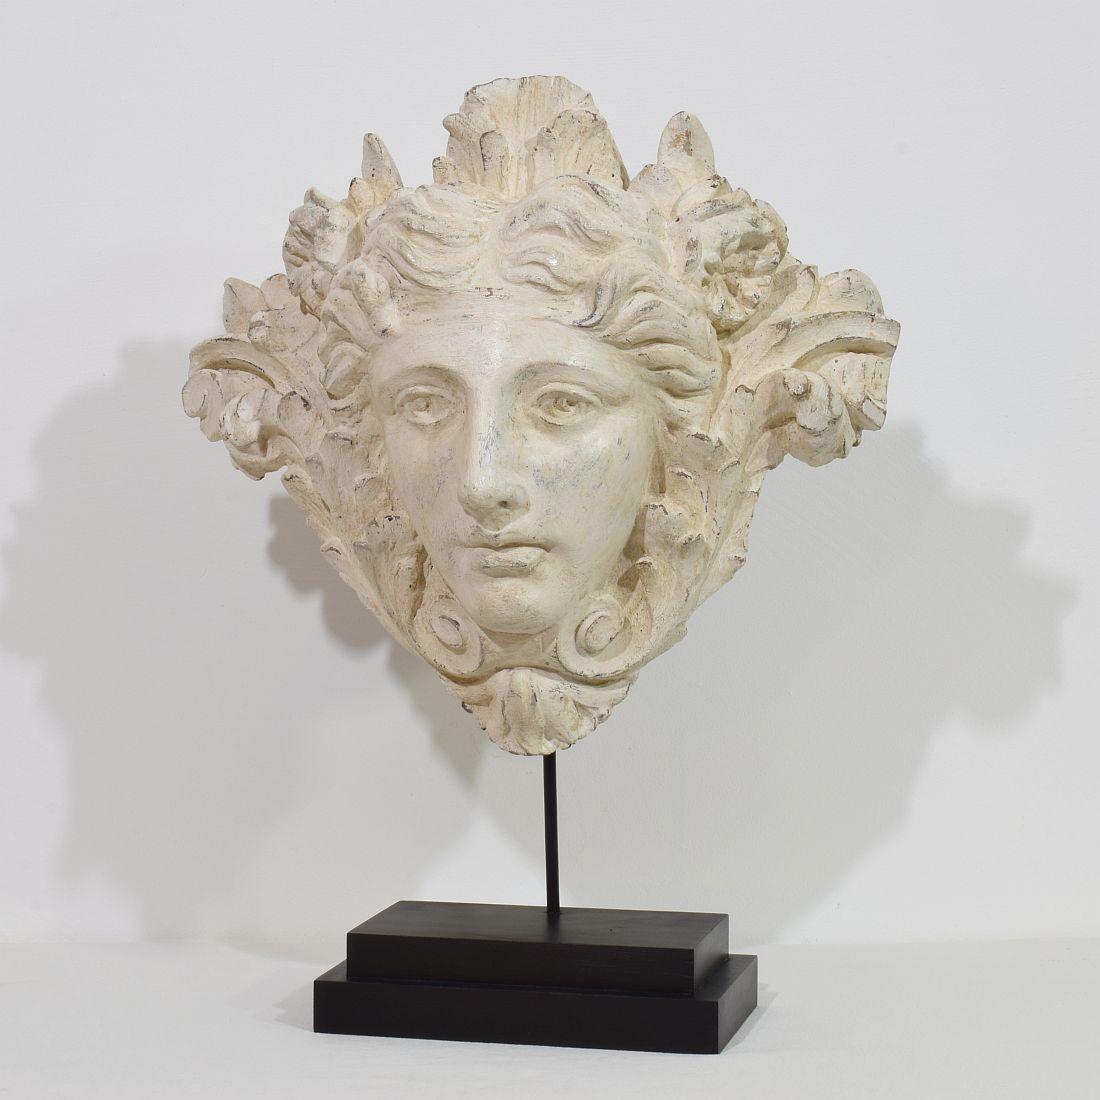 Amazing Belle époque ornament that once adorned a hallway. 
Beautiful hand-carved head with traces of several layers of paint. Really a unique period piece.
France circa 1850-1880
Weathered and small losses.
Measurements: H:45-58cm  W:46cm D:23cm